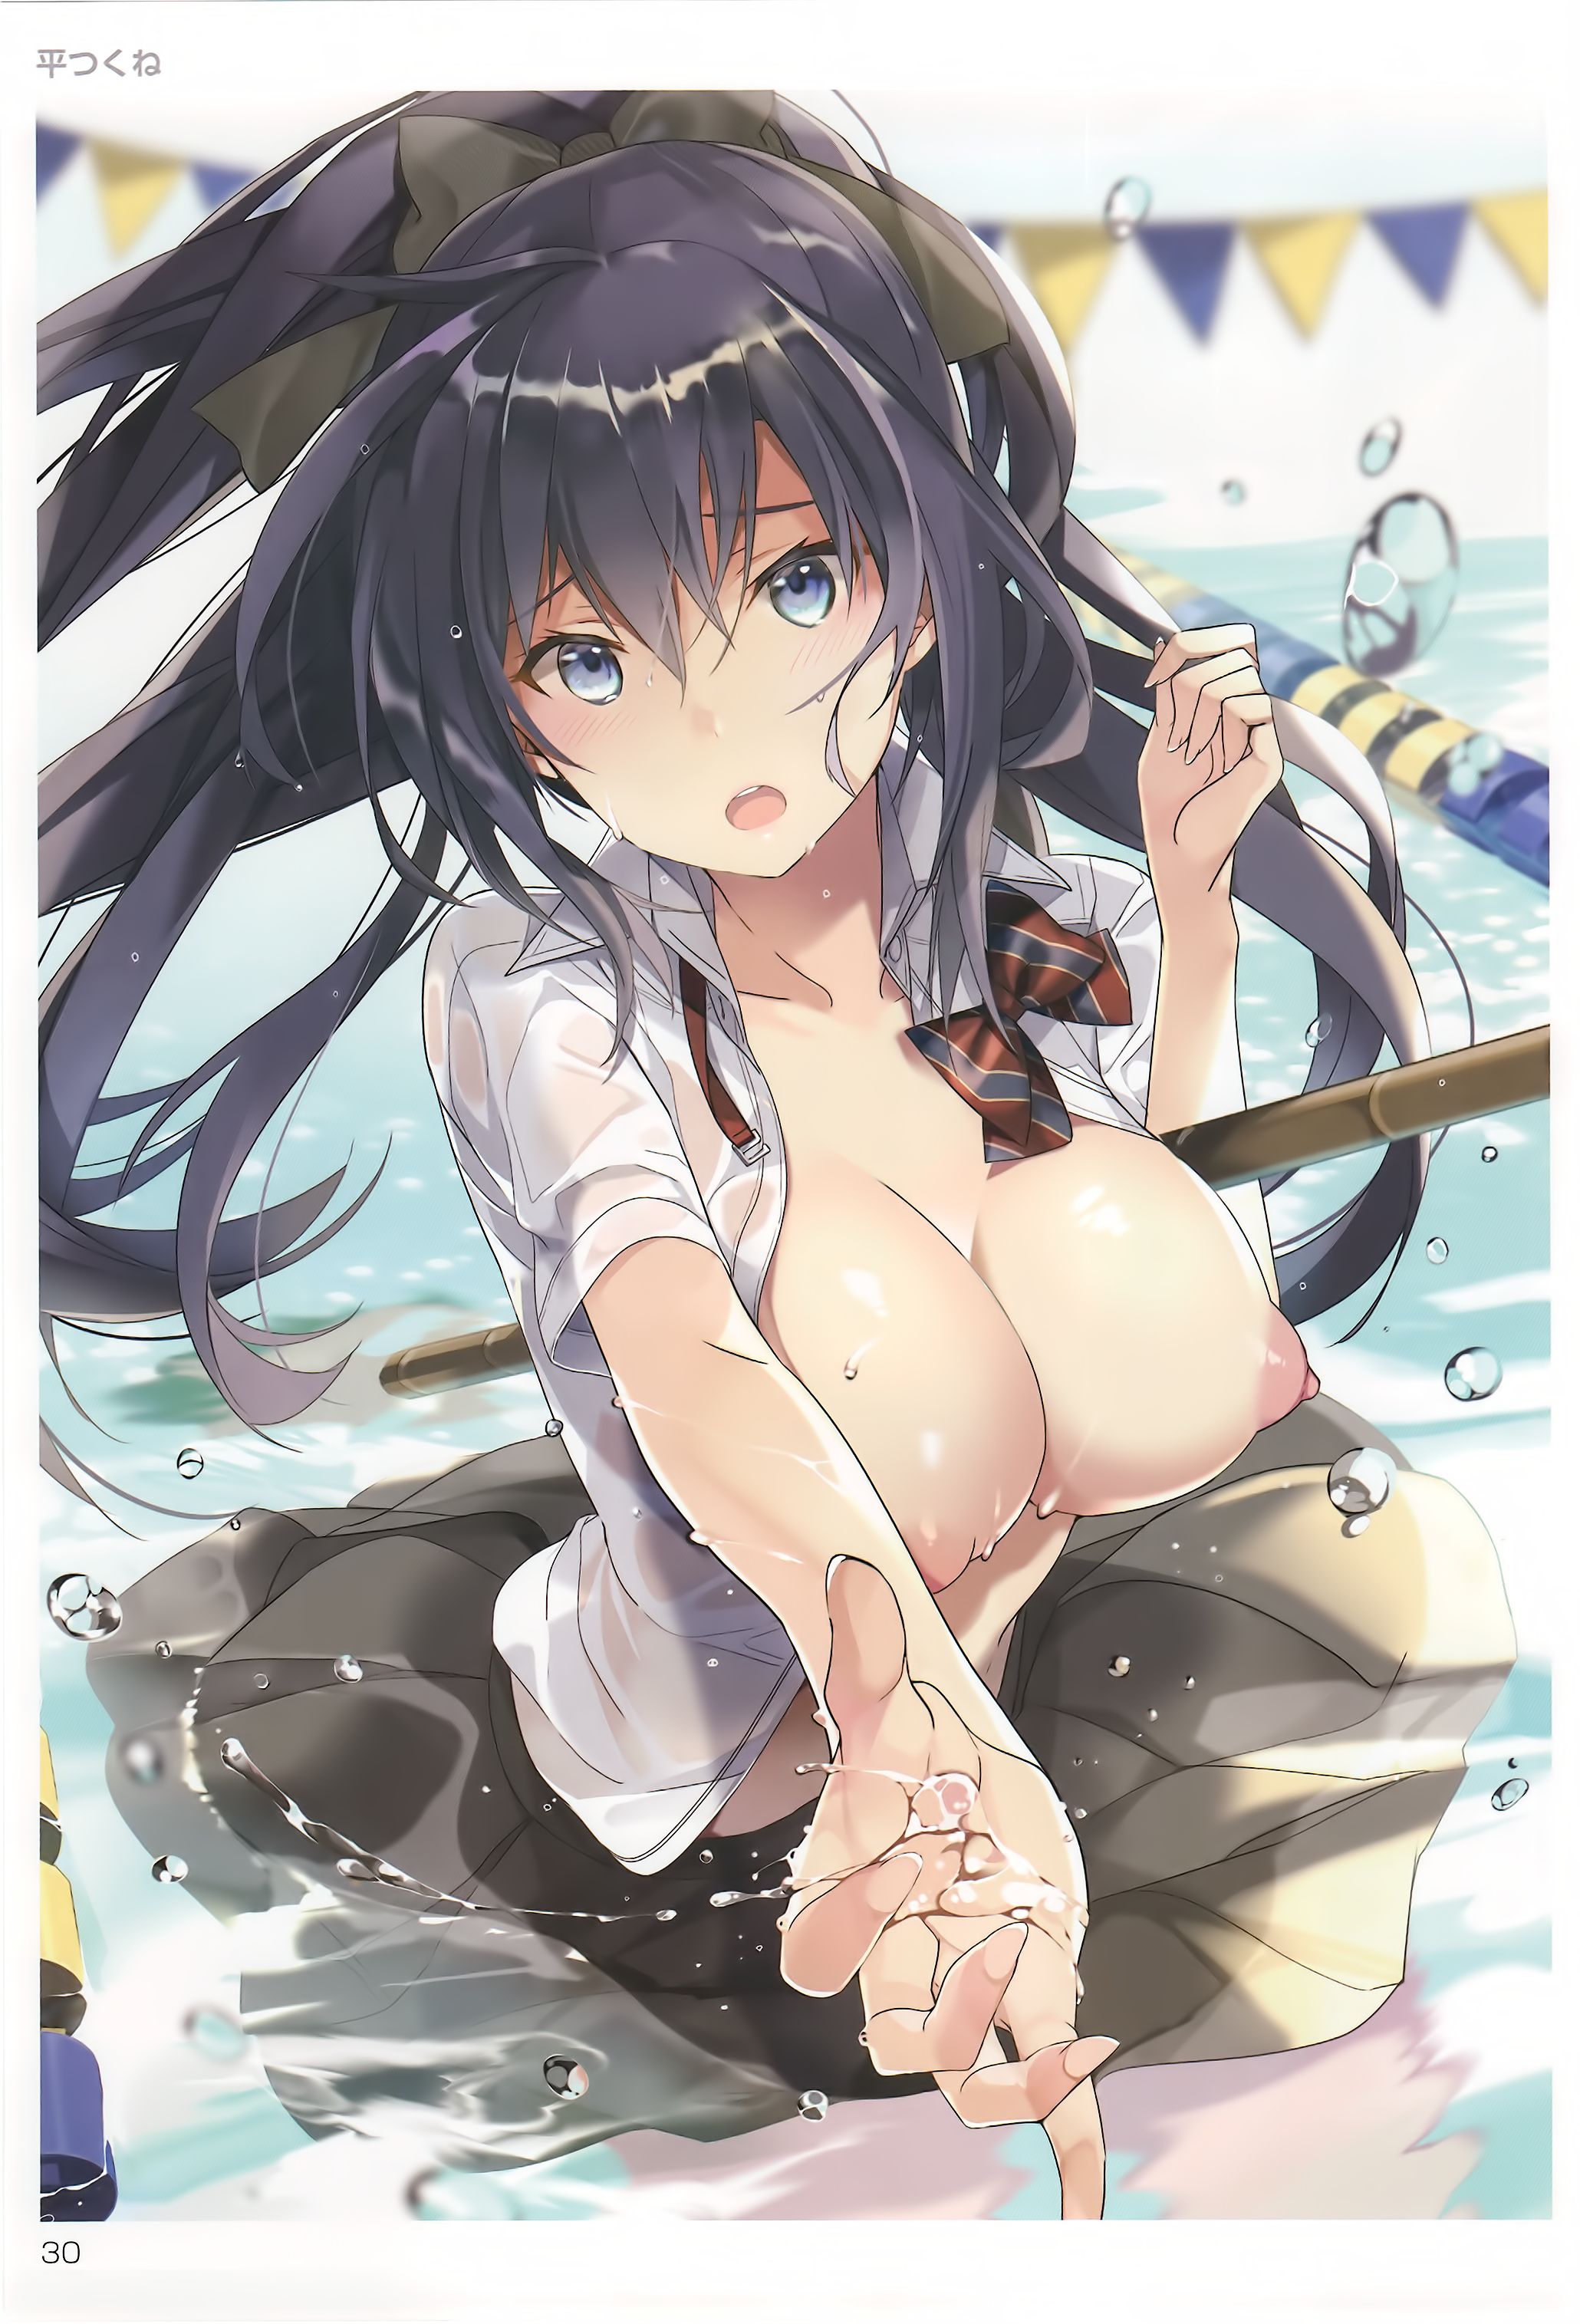 Erotic anime summary Erotic image collection of wet transparent beauties and beautiful girls that are variously transparent [50 sheets] 17